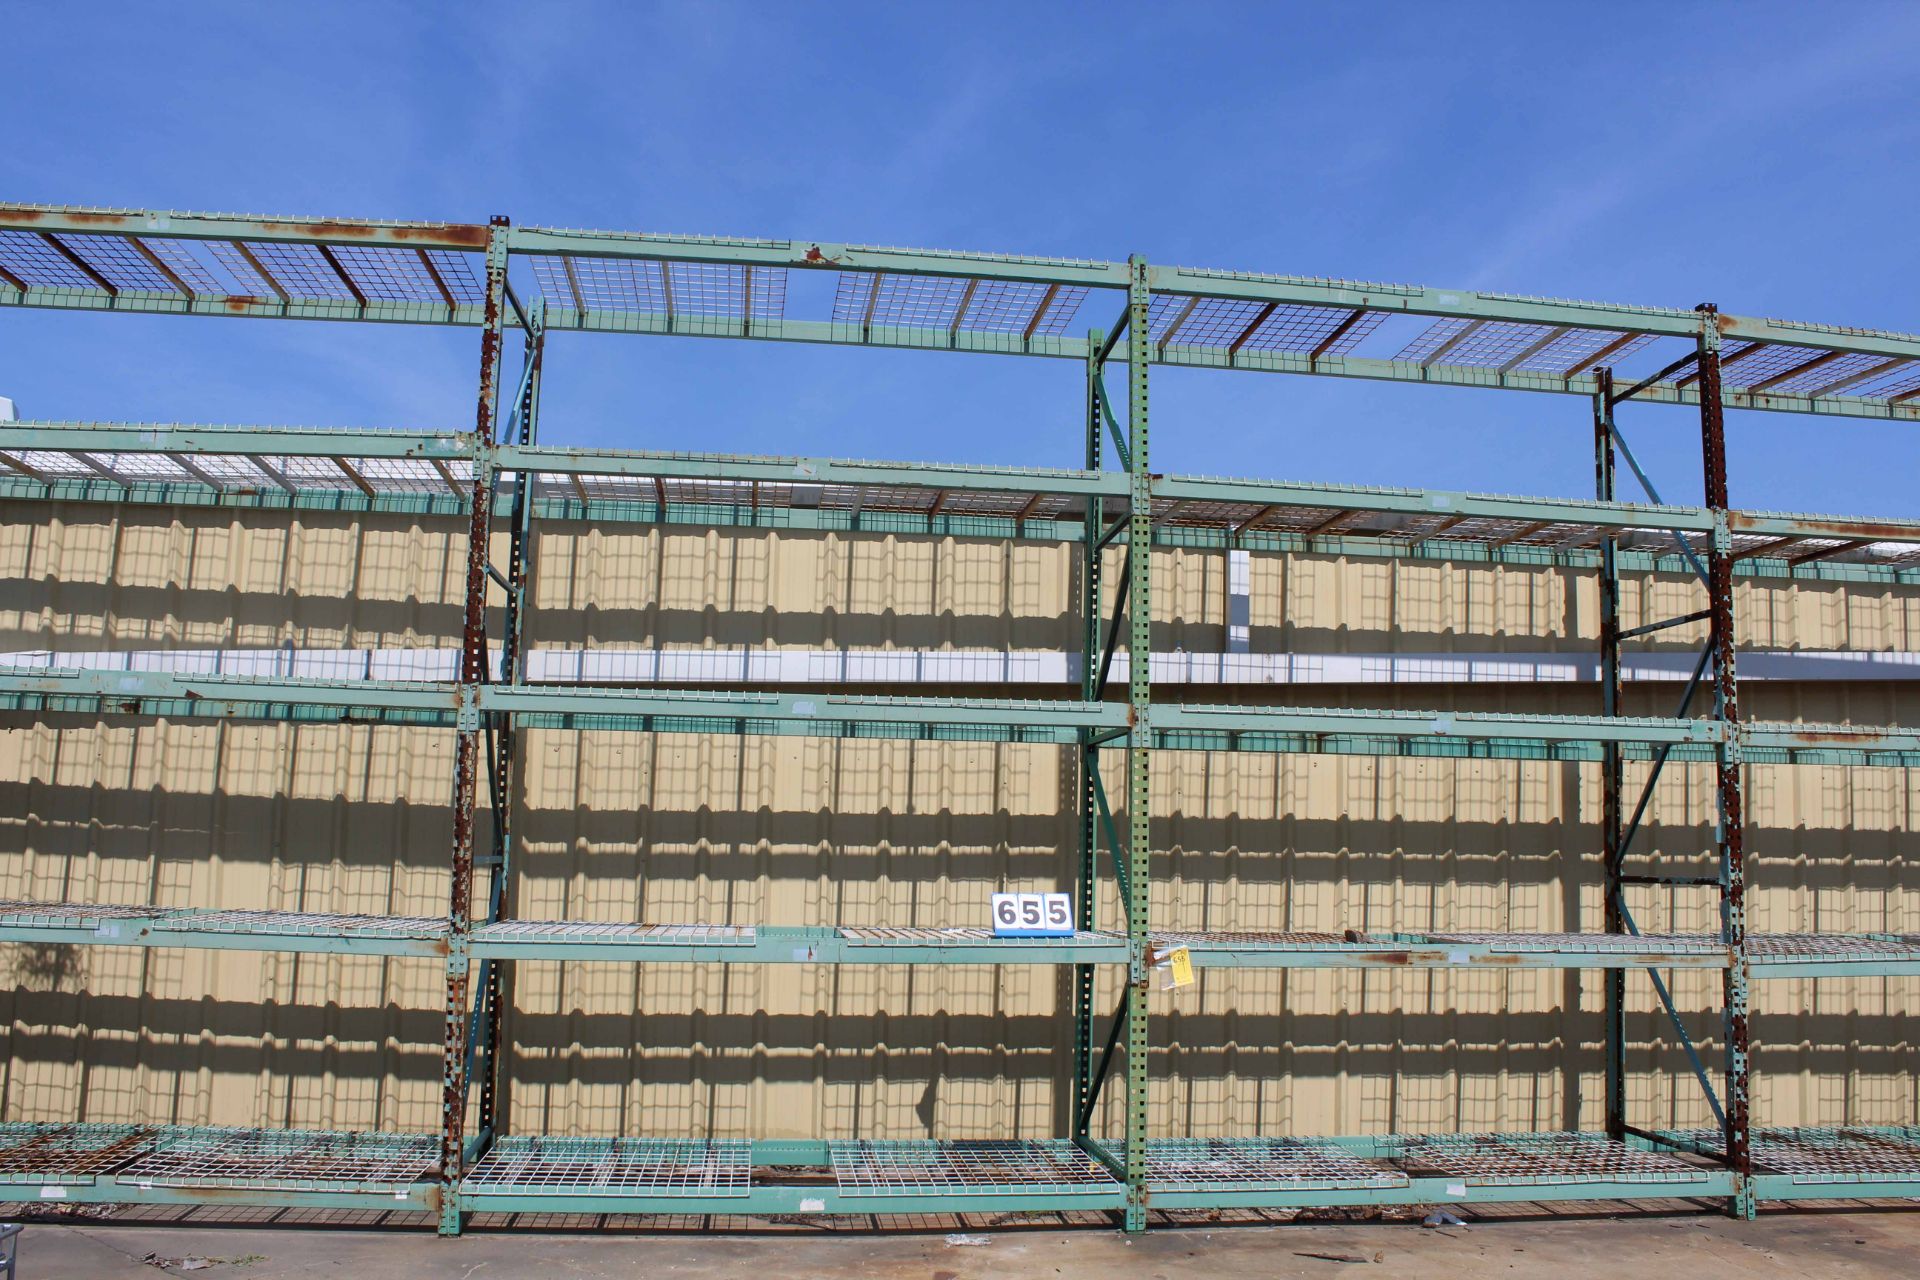 LOT OF PALLET RACKING SECTIONS (7), 14' x 44' uprights, 9' crossbeams (delayed removal - one week)